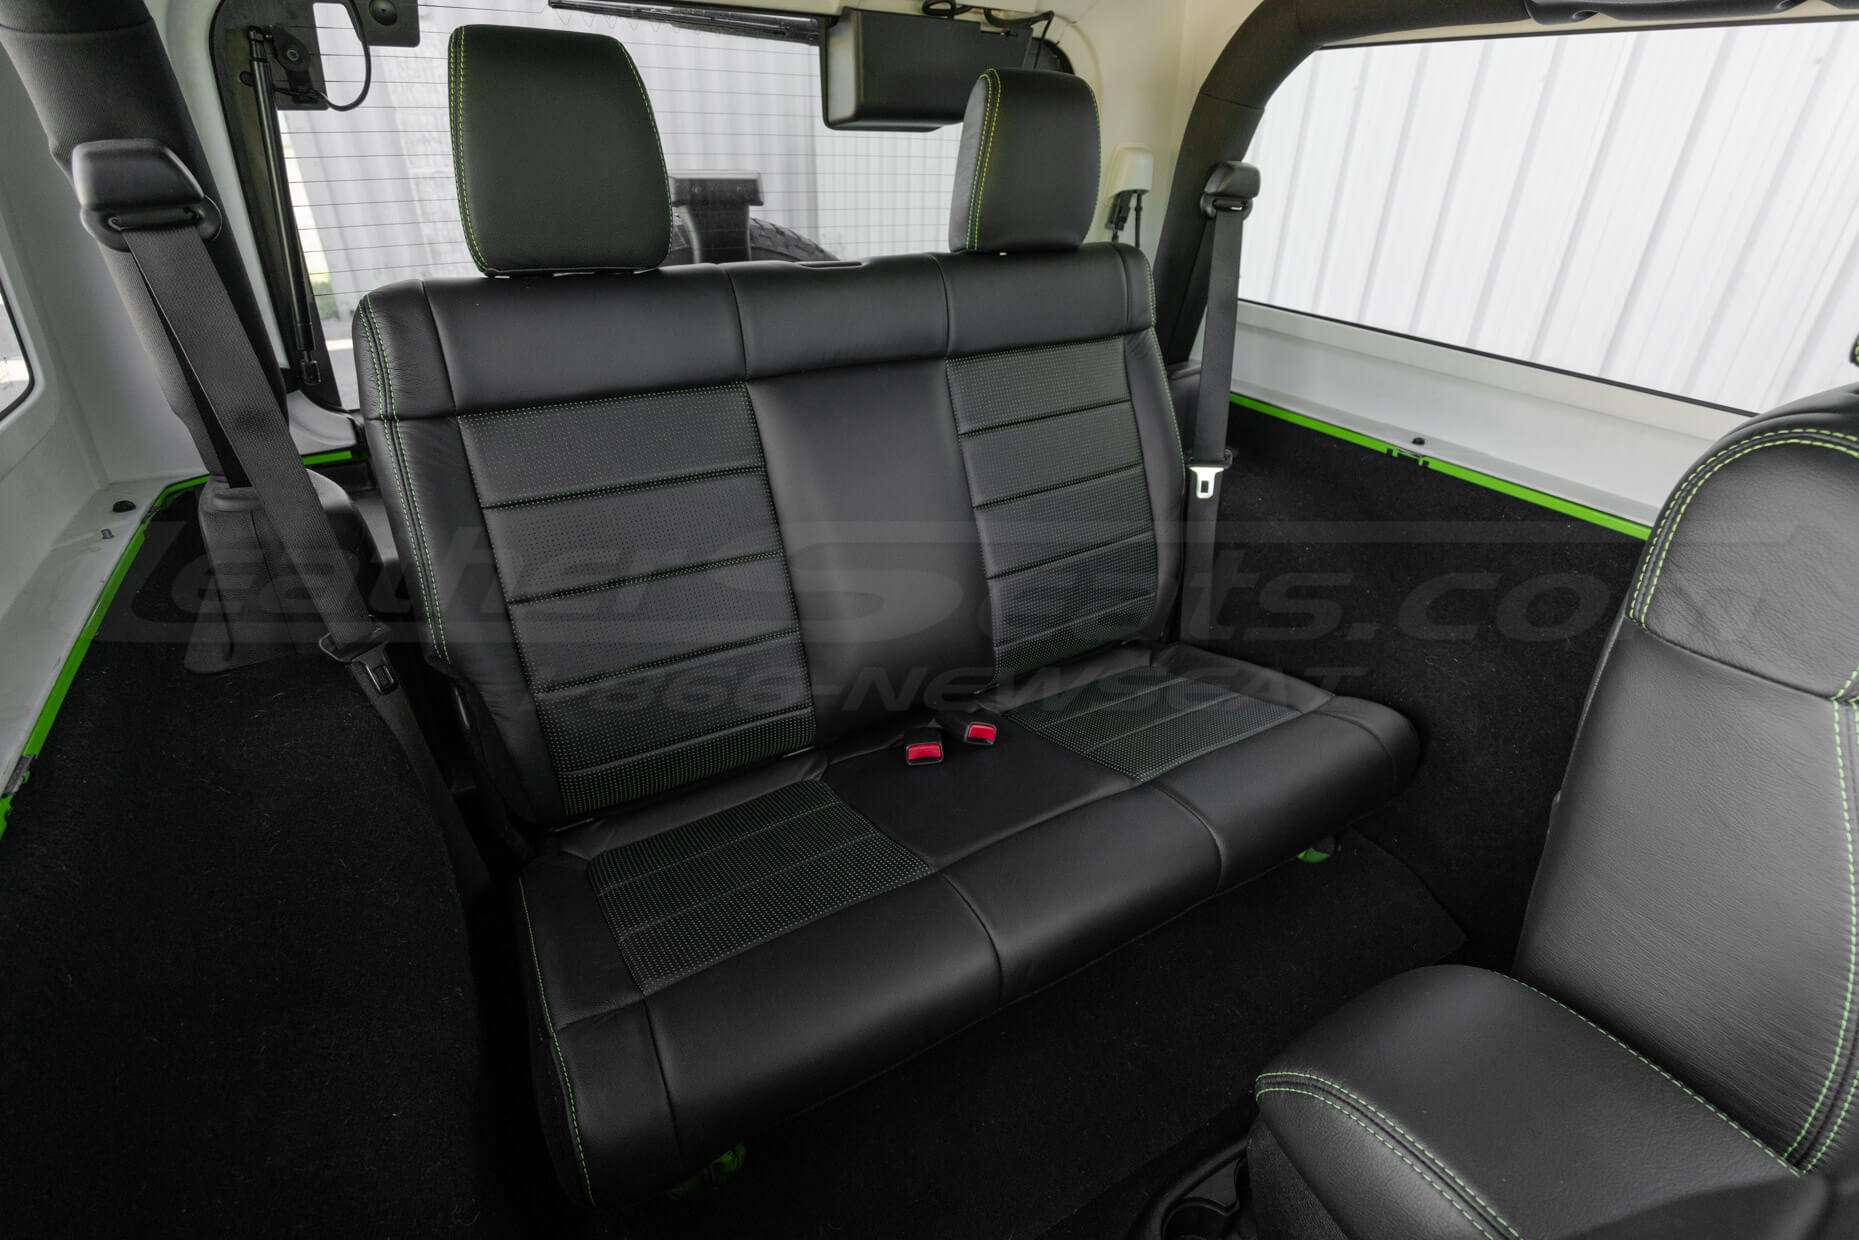 Installed Two-Tone Black w/ Piazza Green Inserts Jeep Wrangler JK Rear Leather Seats